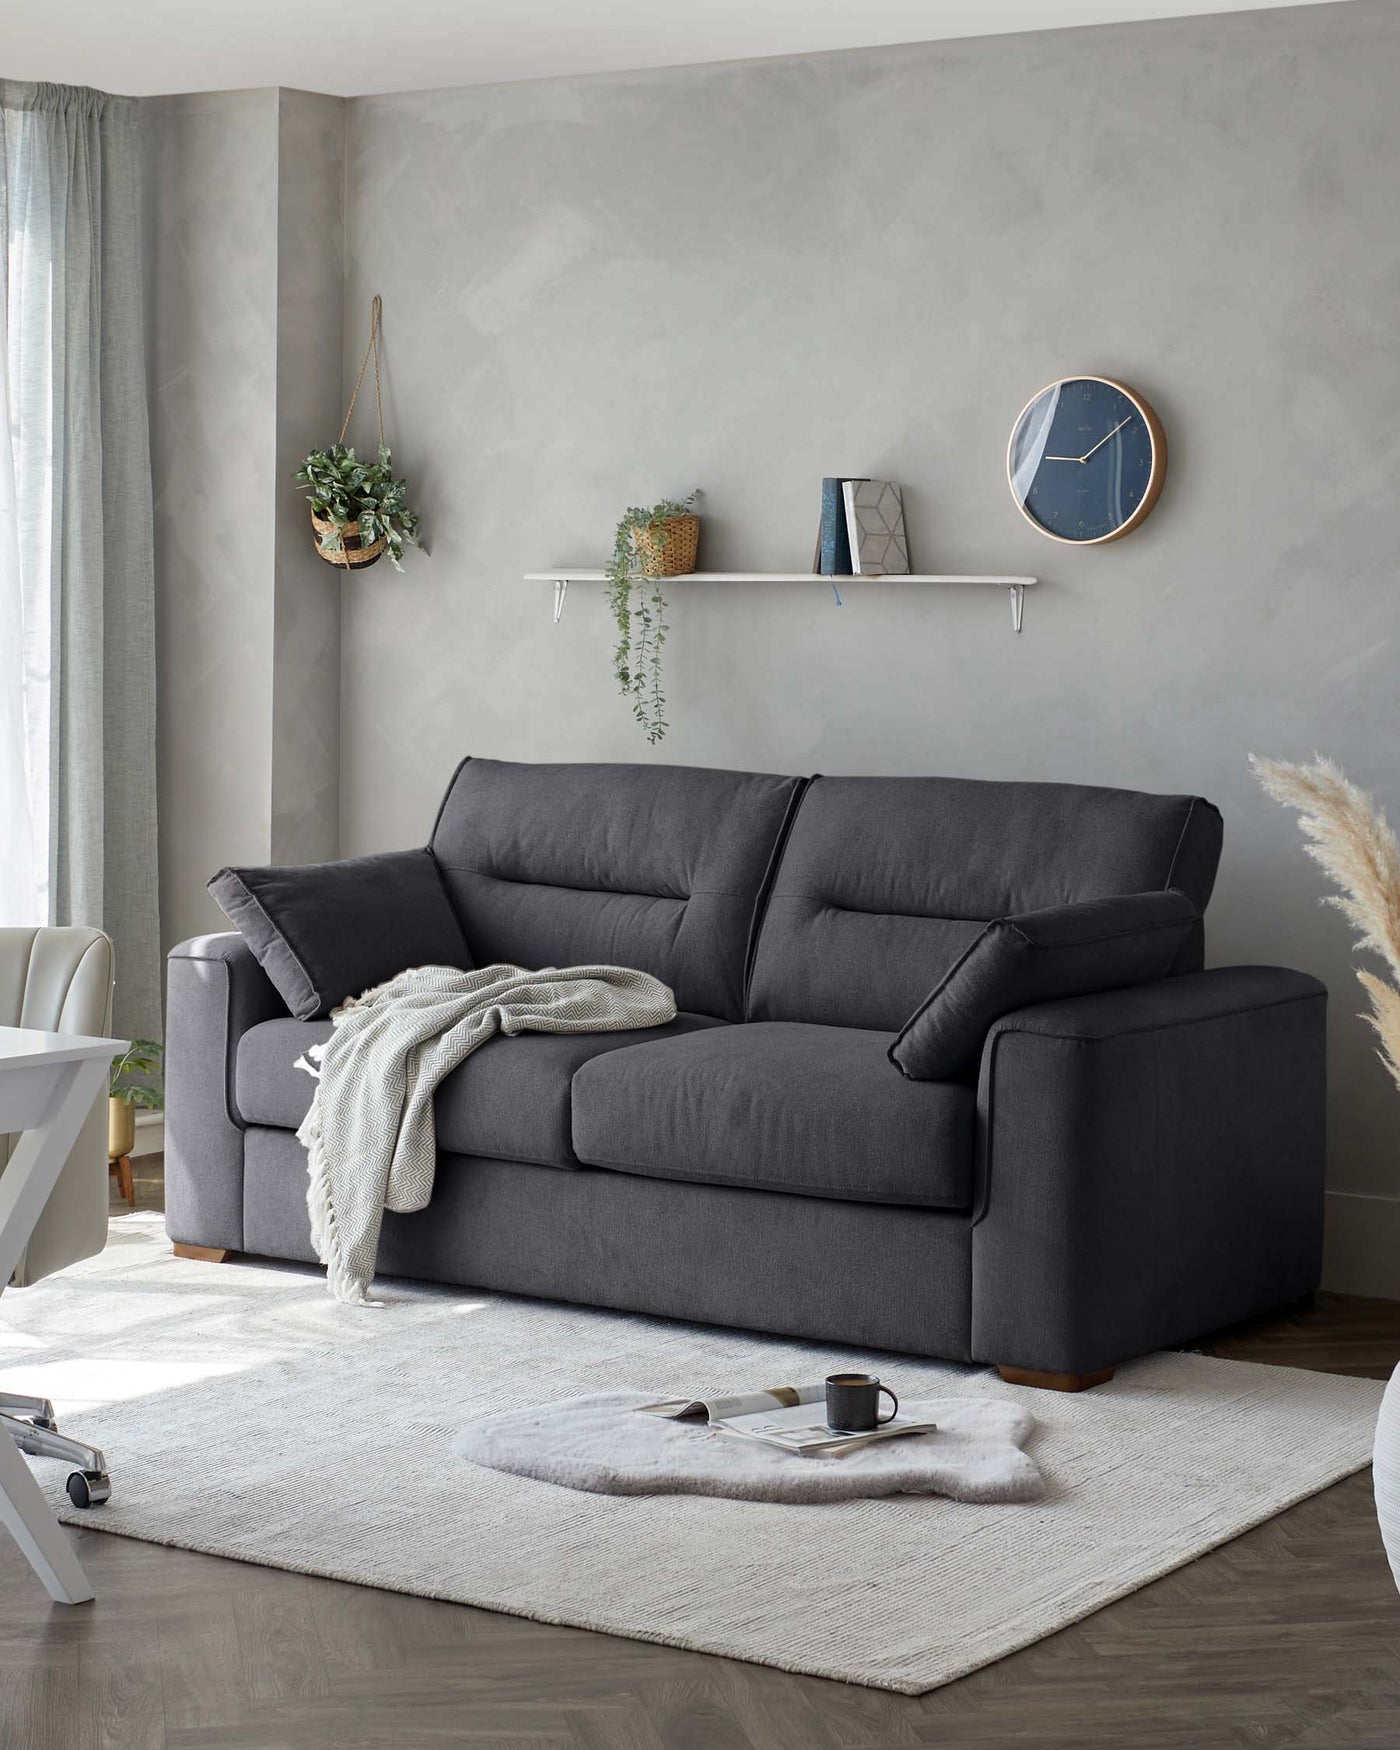 A contemporary charcoal grey fabric sofa with plush cushions and a clean-lined silhouette sits atop a light beige textured area rug, accented with a neutral-toned throw blanket casually draped on one side.